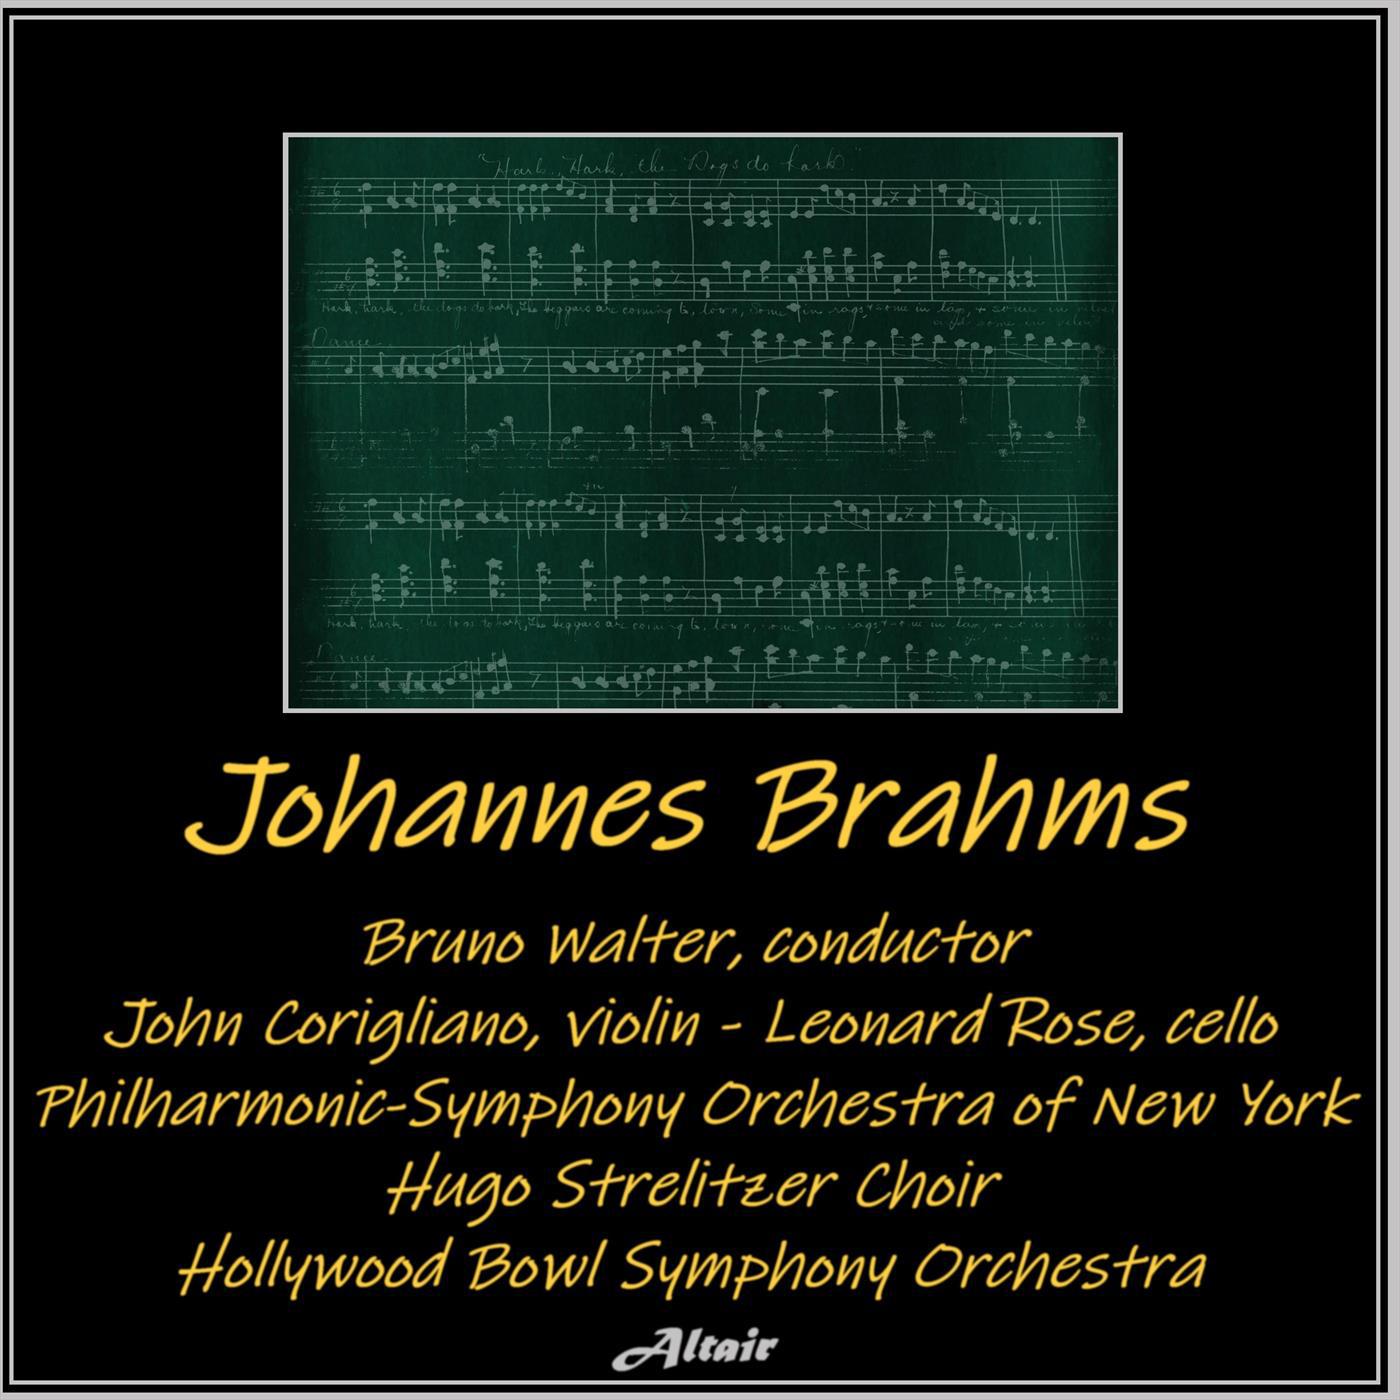 Philharmonic-Symphony Orchestra Of New York - Symphony NO. 2 in D Major, Op. 73: I. Allegro Non Troppo (Live)